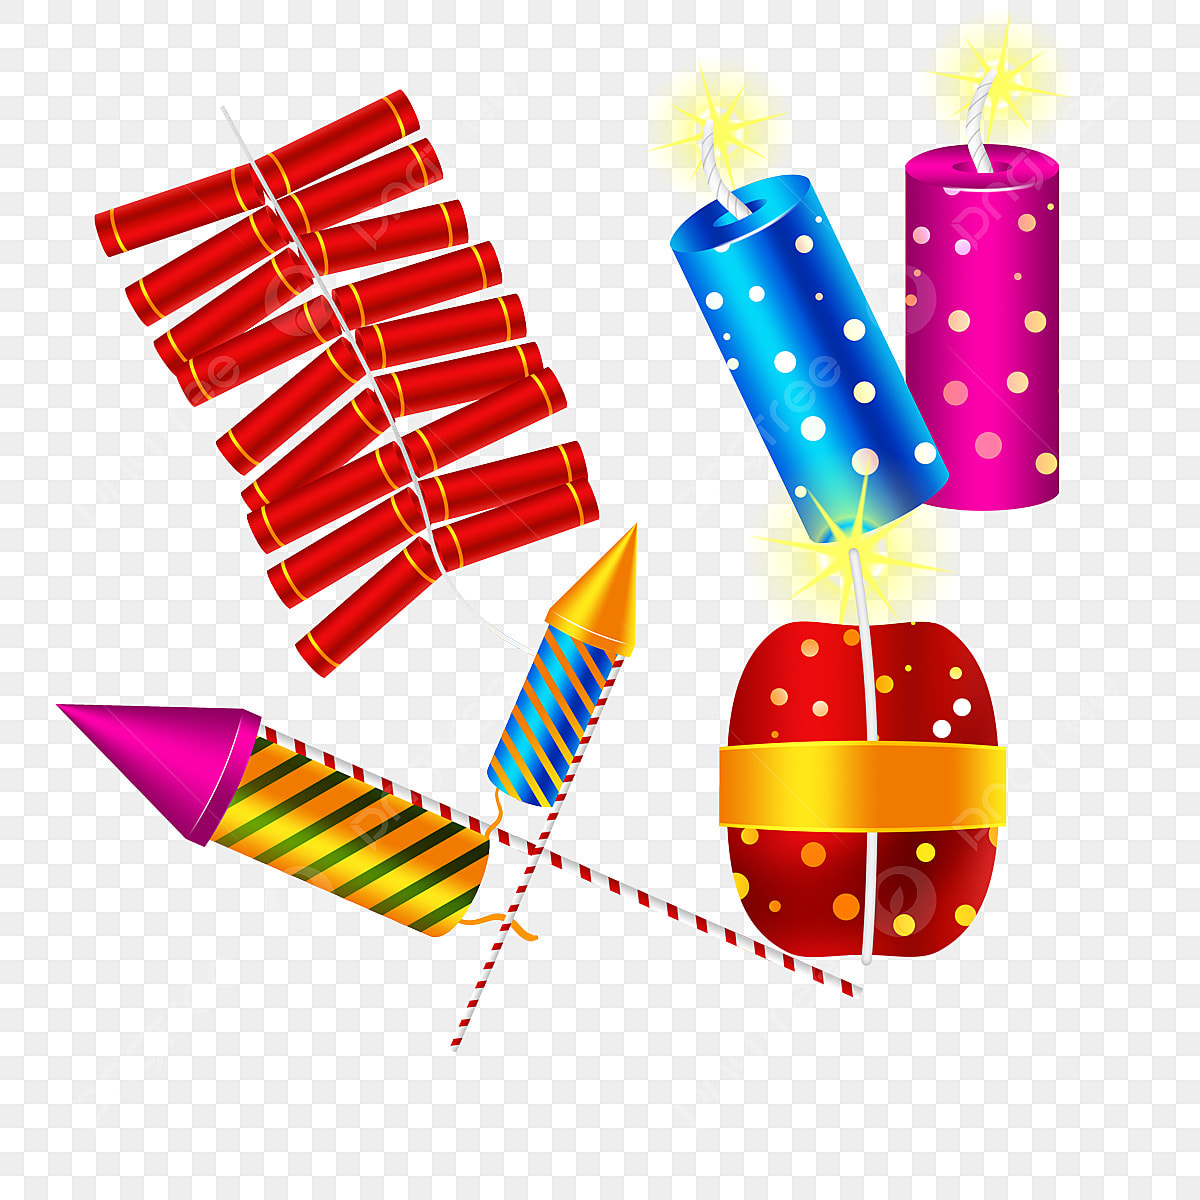 crackers png images